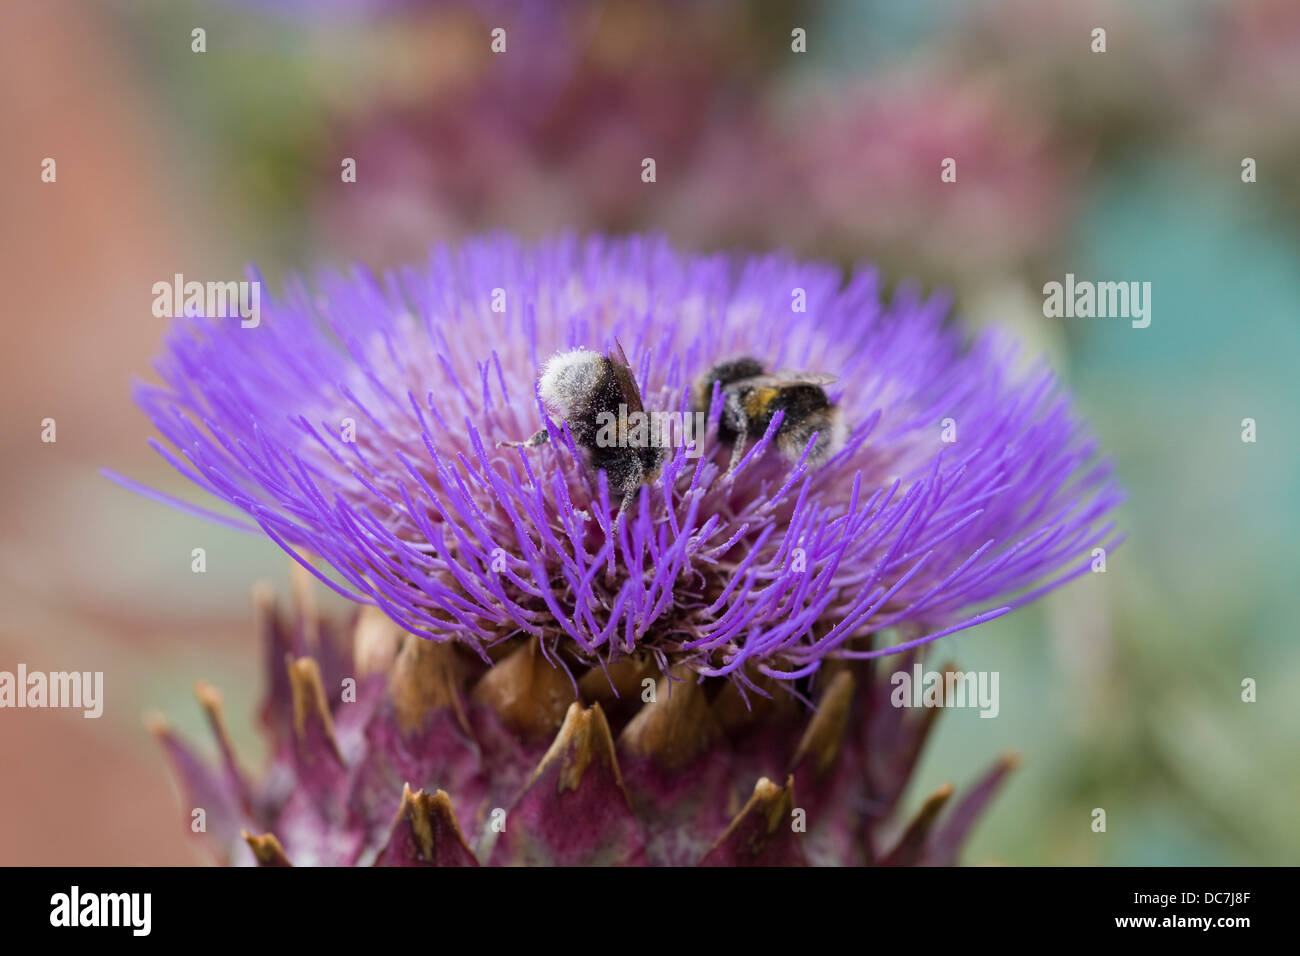 Cynara cardunculus Thistle with Bees collecting and covered in Pollen Stock Photo